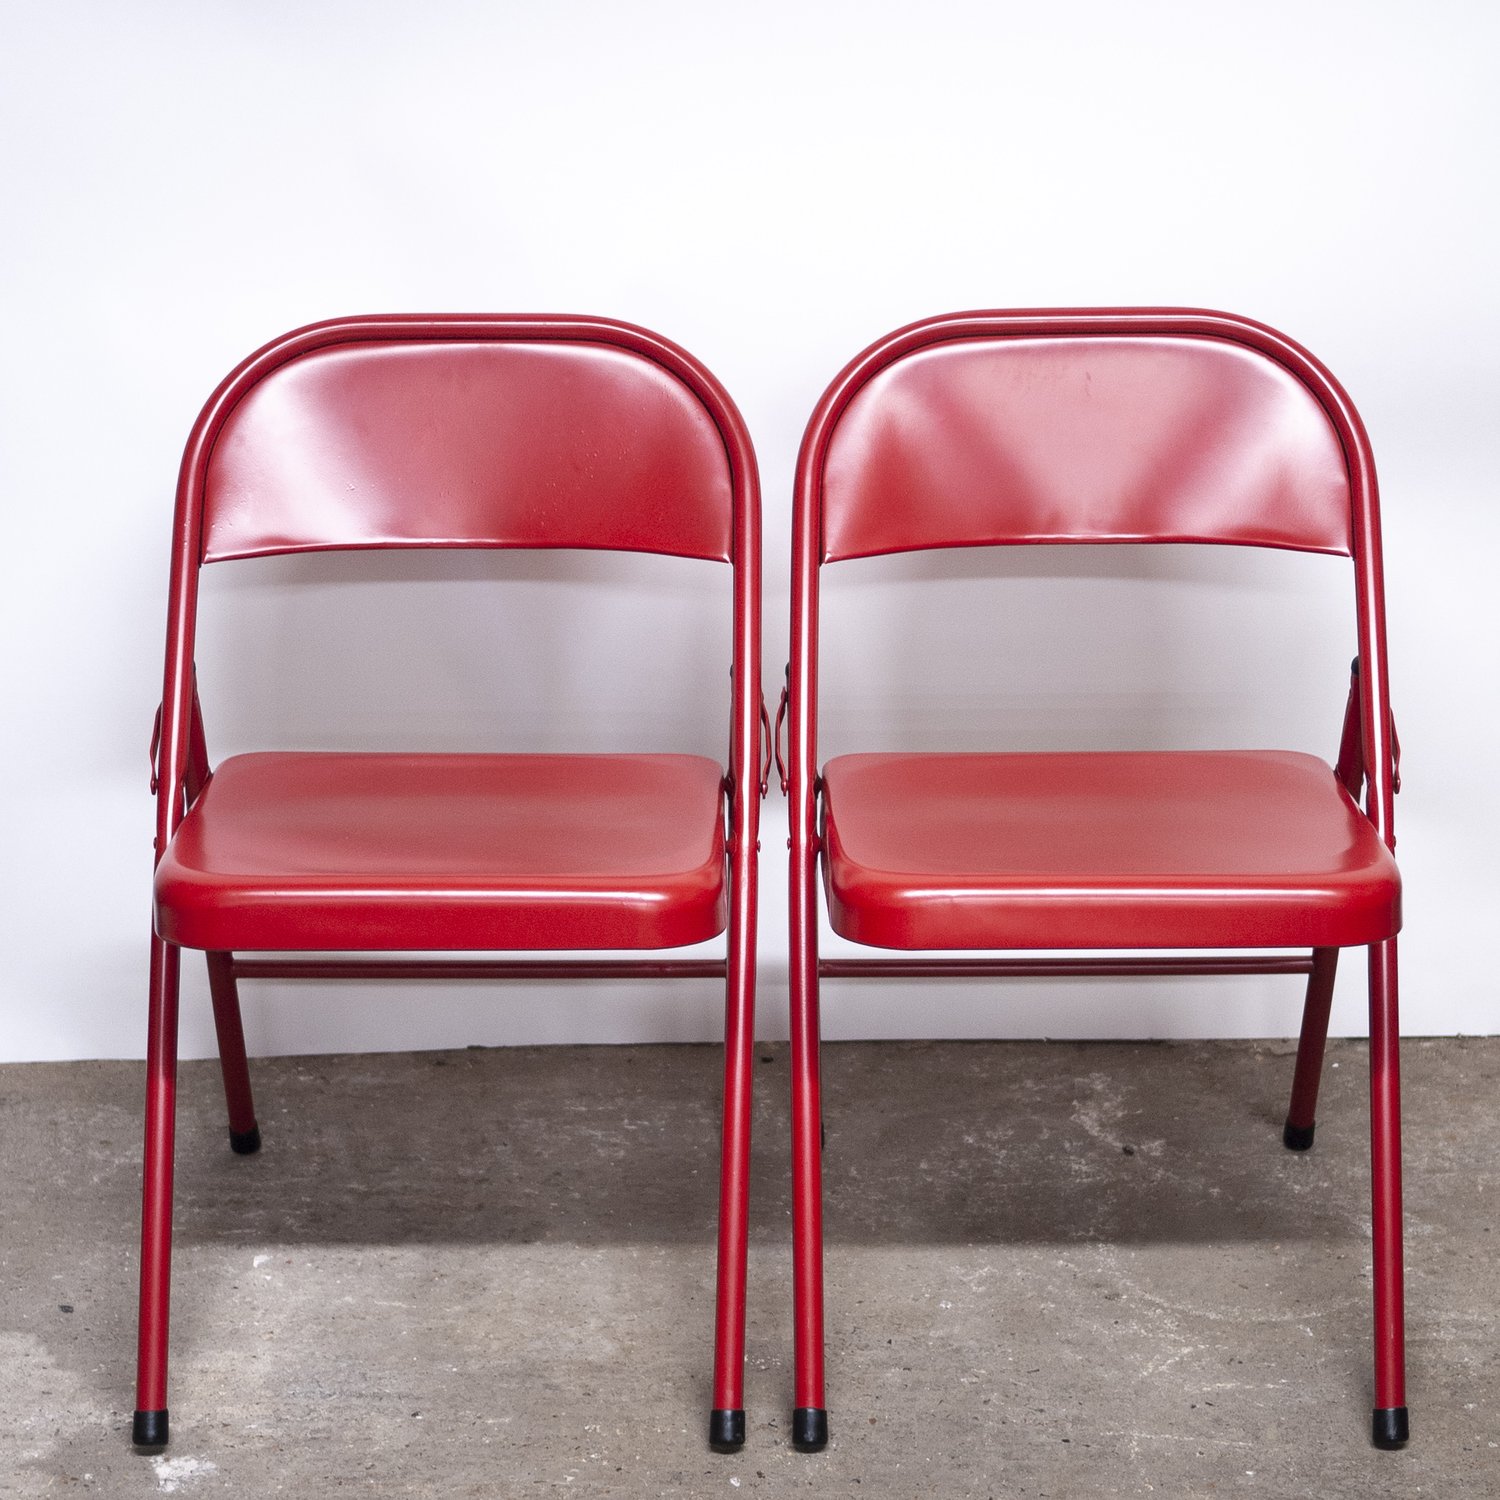 Folding Red Metal Chairs, 1980s - Hunt Vintage